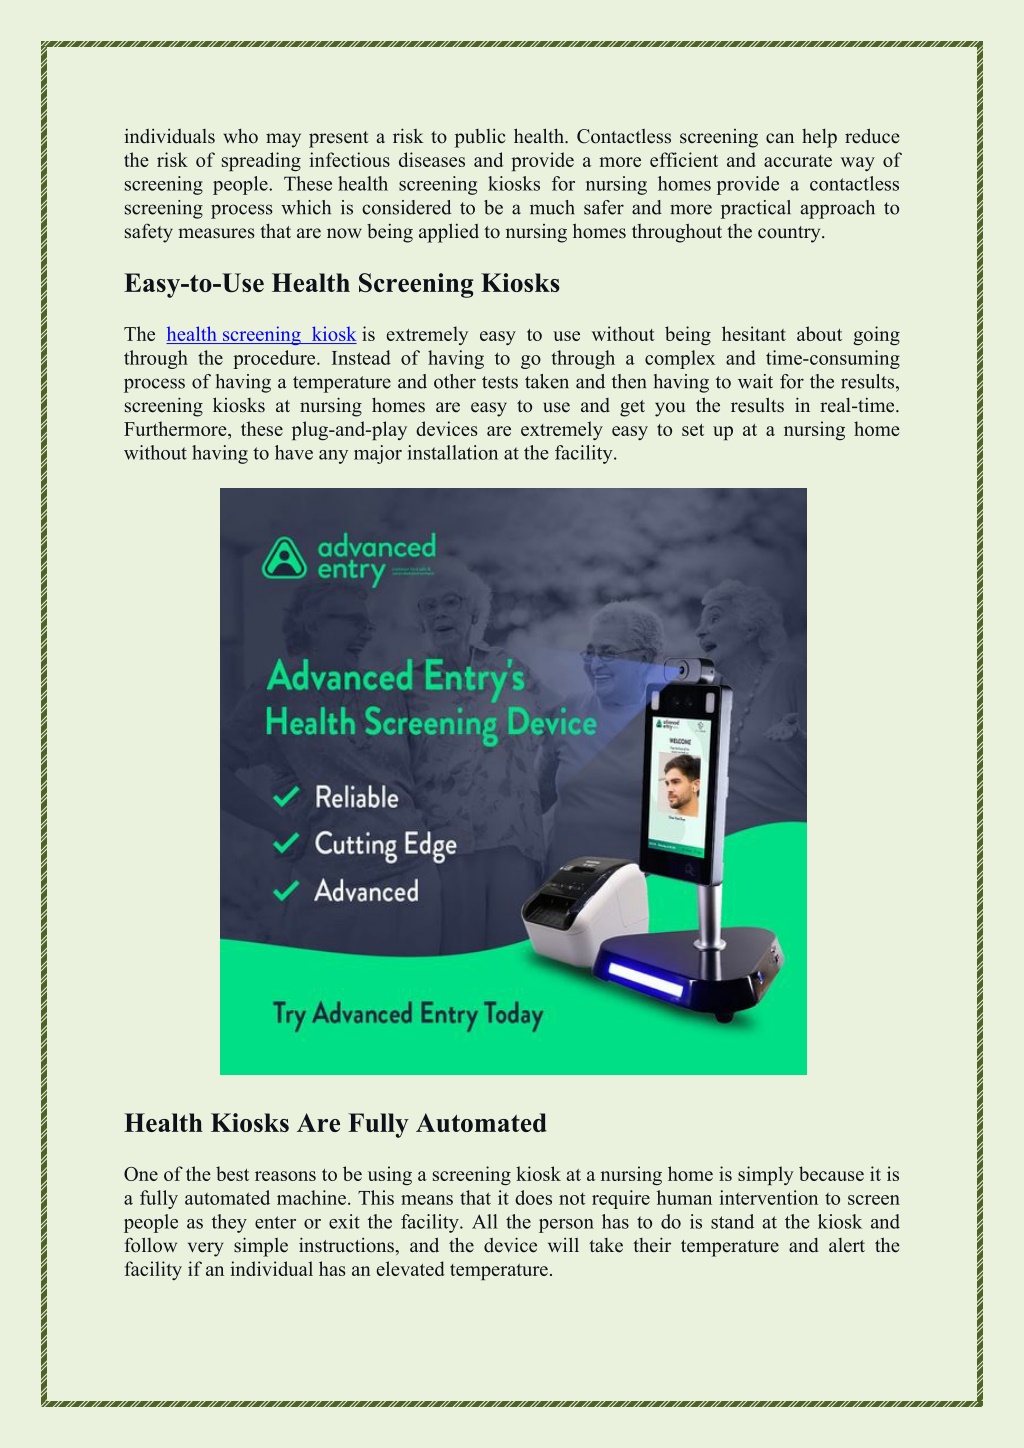 Ppt What Is A Health Screening Kiosk And Why Is It Important For Nursing Homes Powerpoint 1652